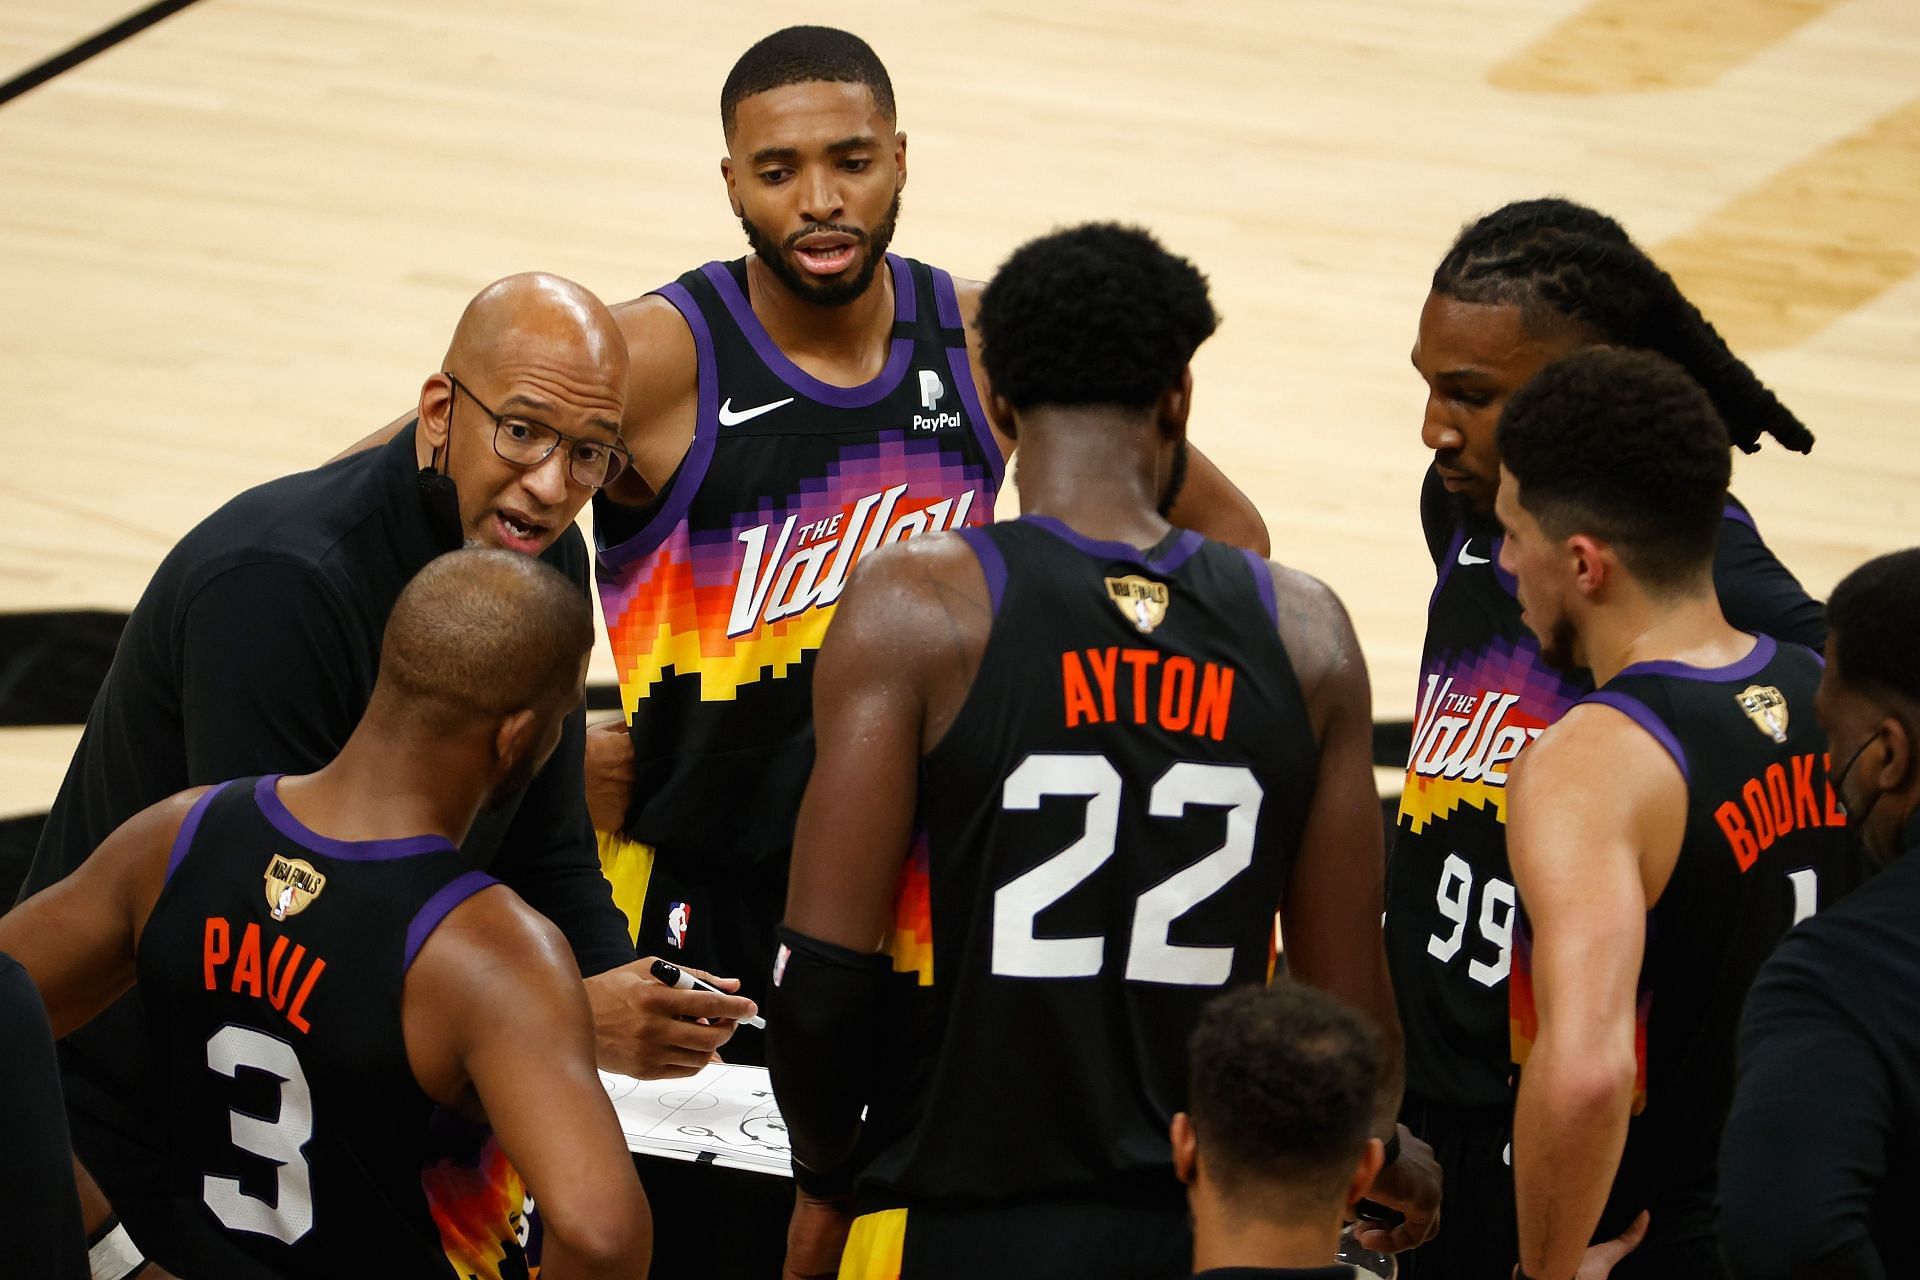 Phoenix Suns coach Monty Williams talks to his players during a timeout.